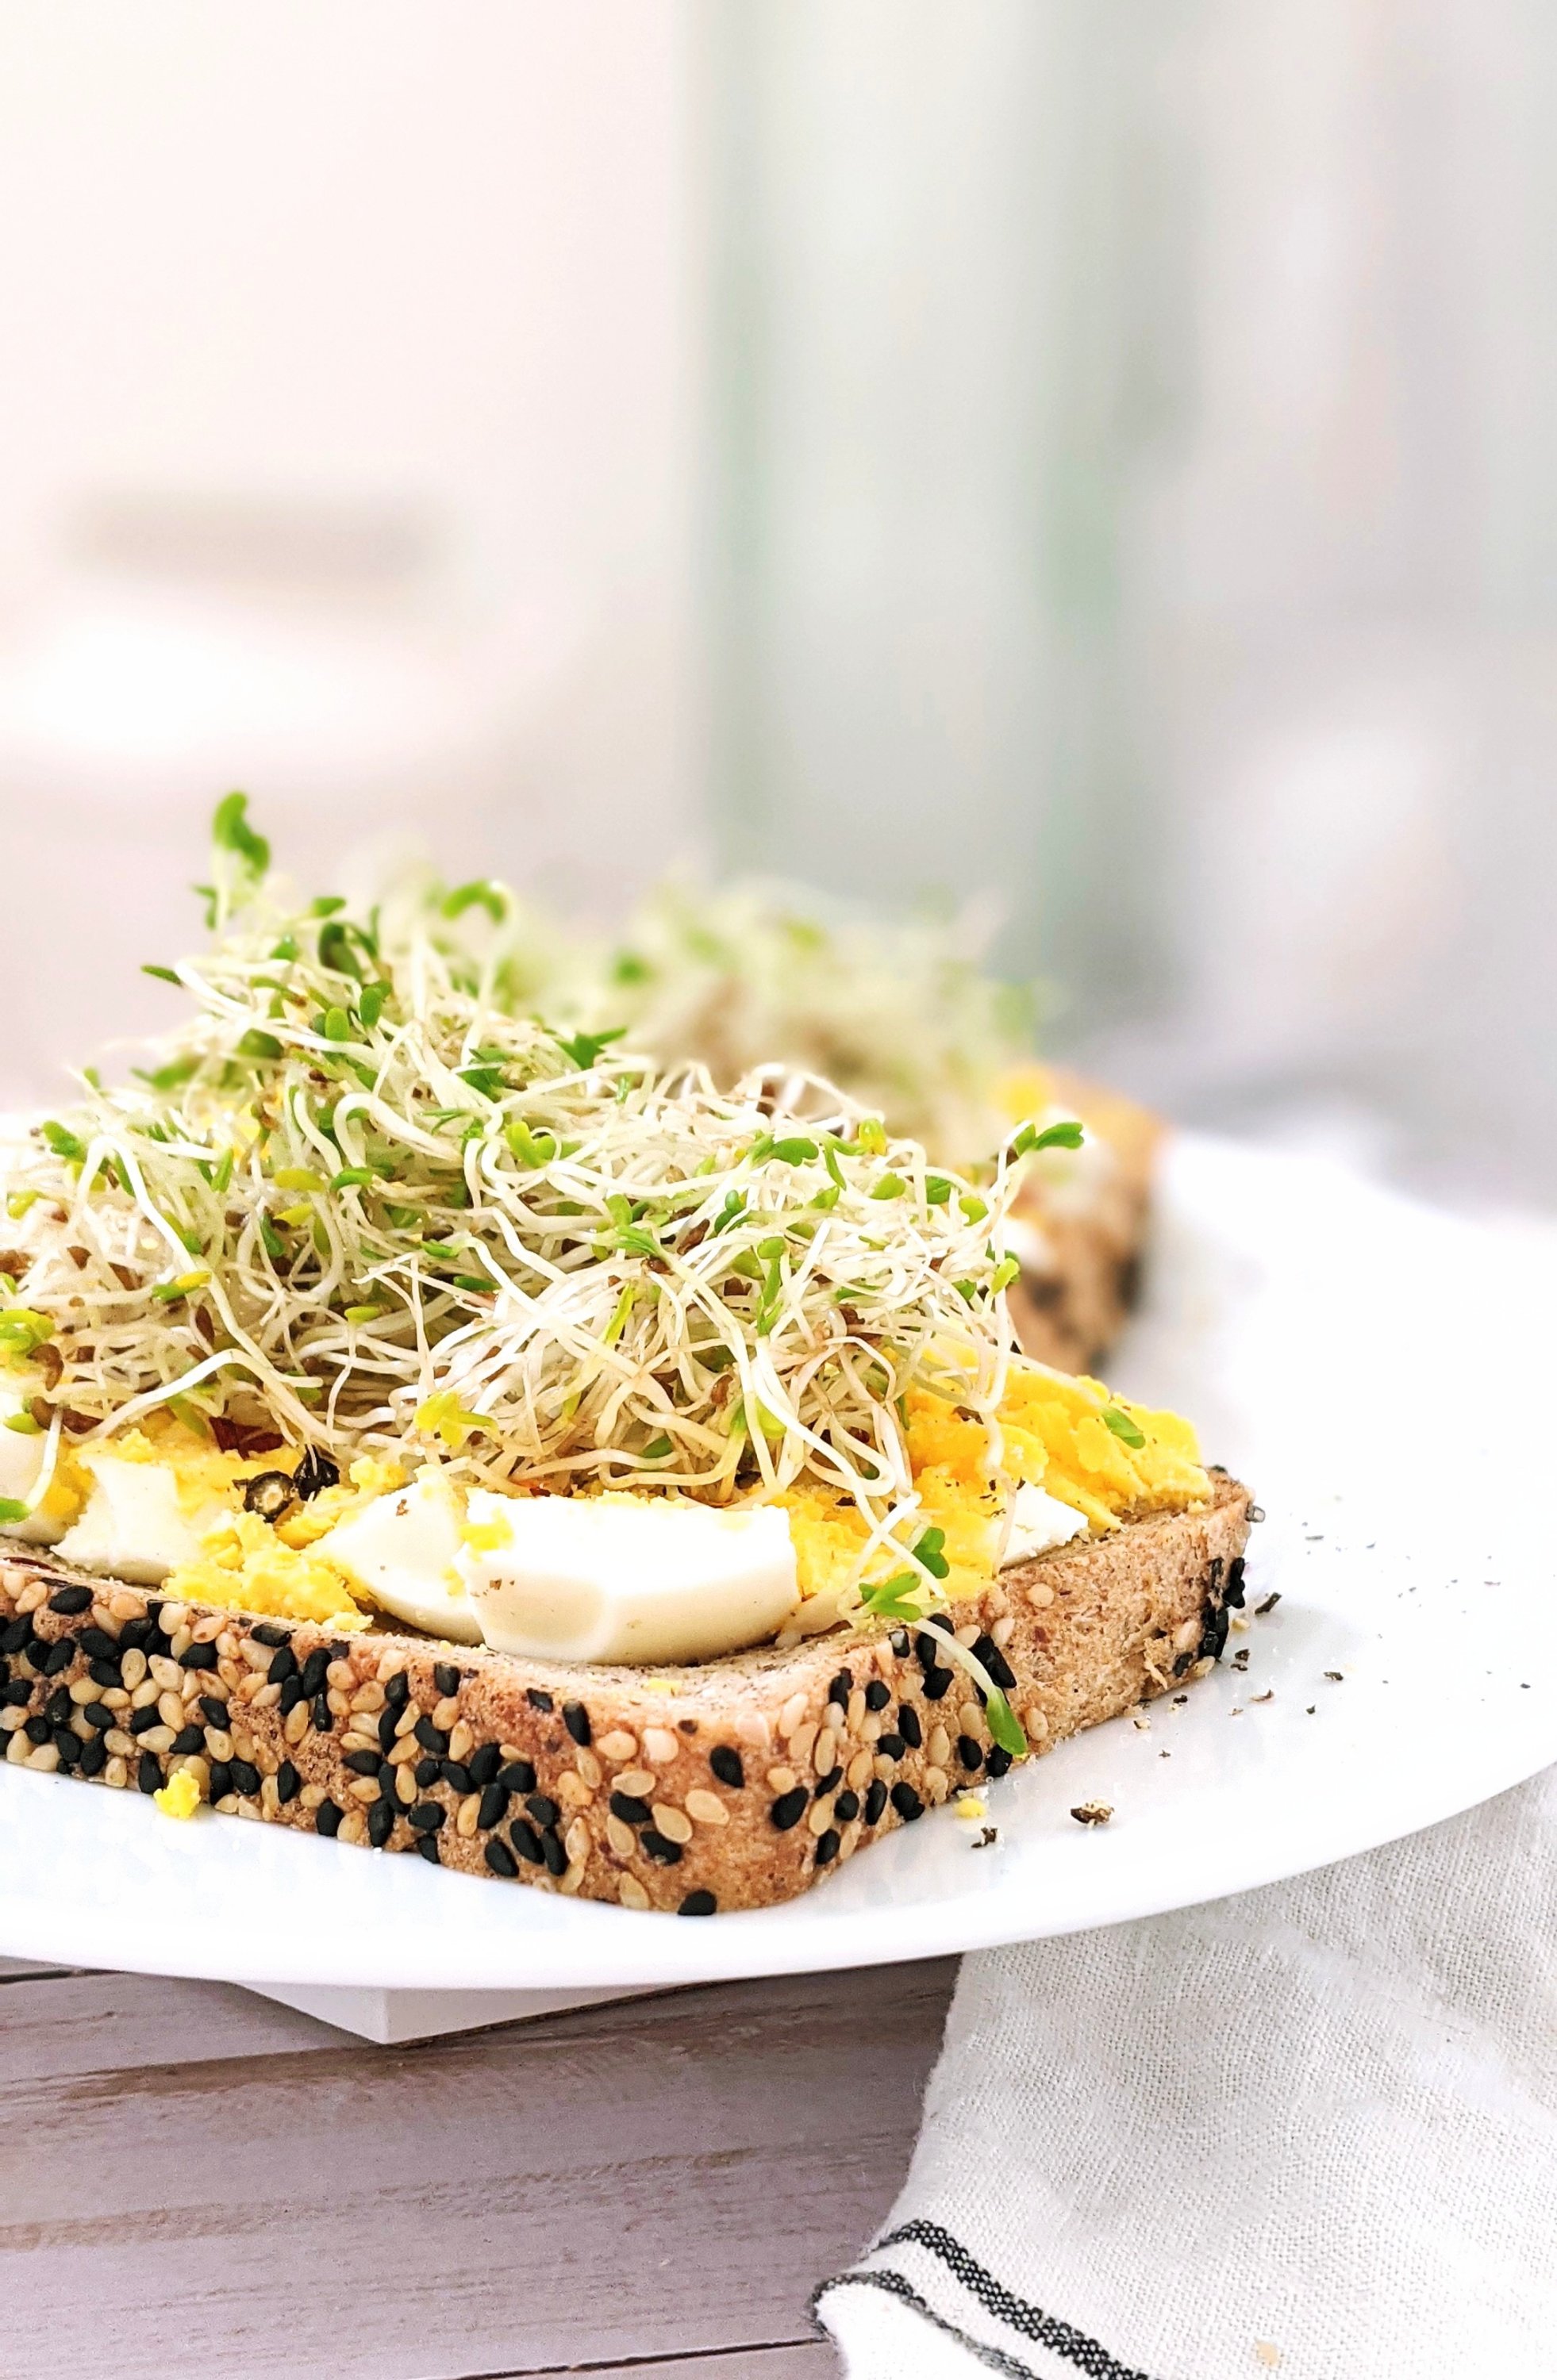 keto recipes with alfalfa sprouts low carb are sprouts keto approved can i eat sprouts on a keto diet how many carbs in sprouts keto recipes with alfalfa sprouts for breakfast